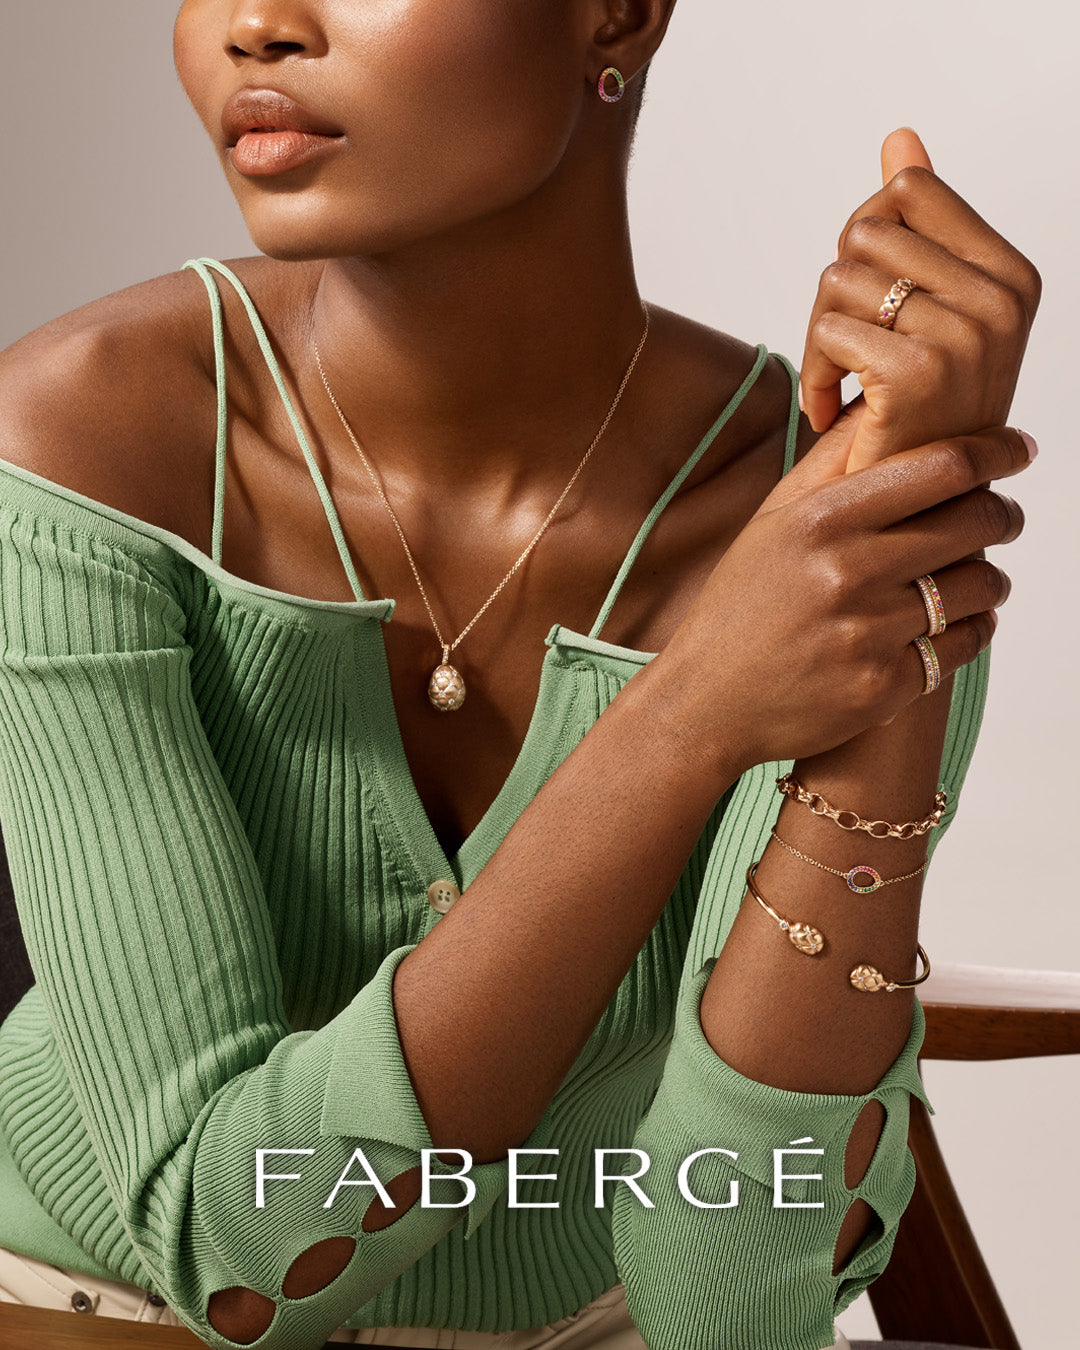 faberge-home-page-banner-mobile-menu